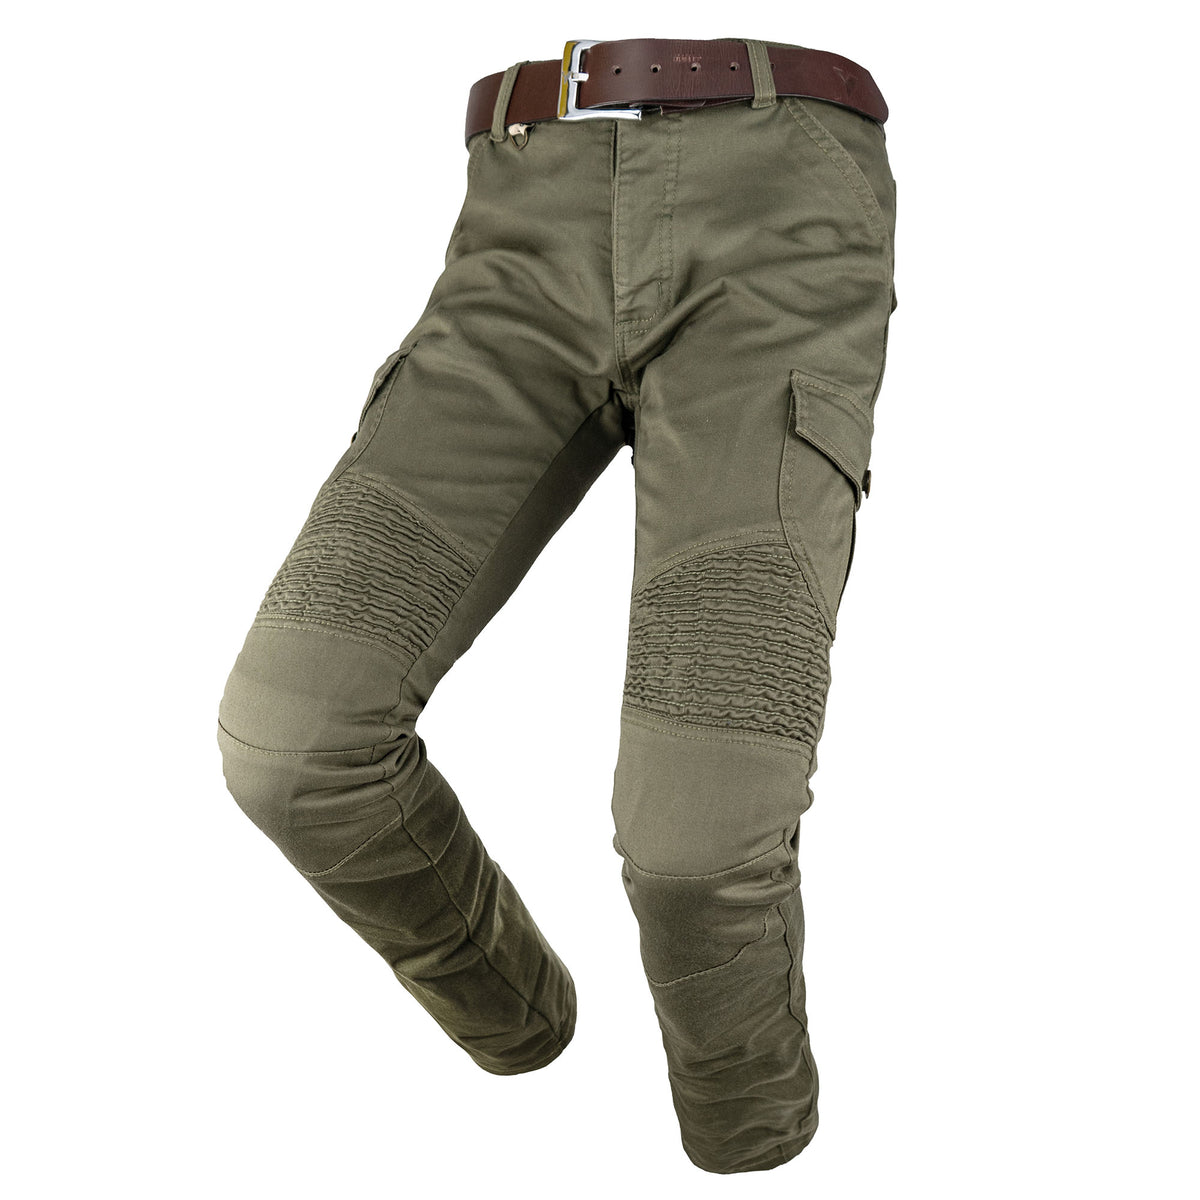 Motorcycle Riding Jeans With Armor Cargo Pants for Men Women XL34 Grey   Amazonin Clothing  Accessories